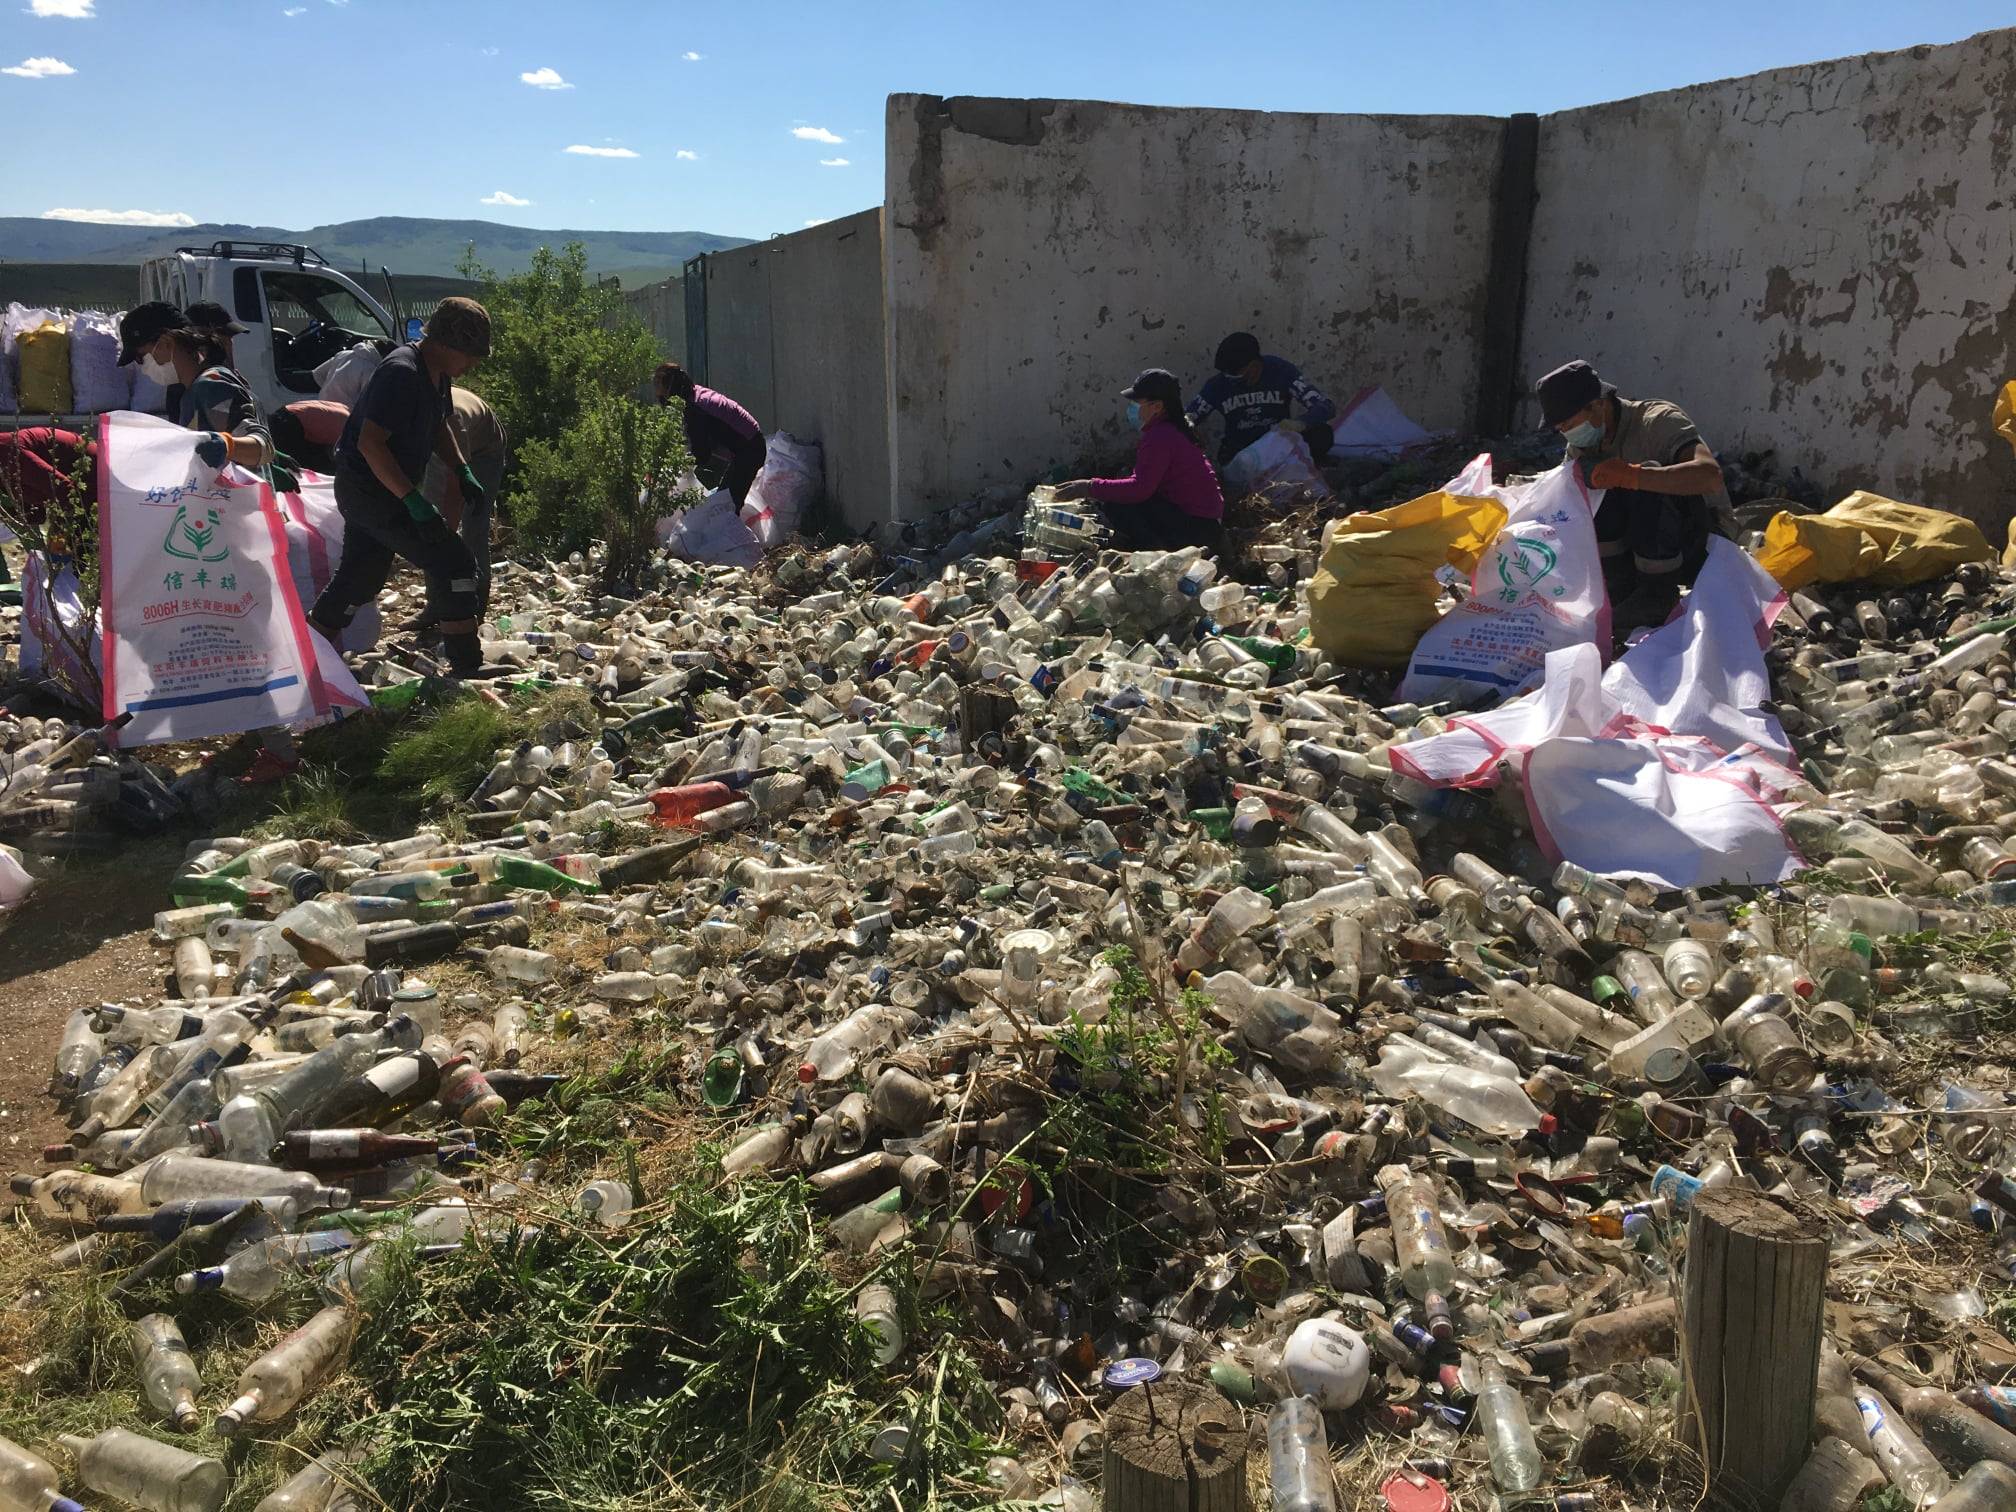 Sustainable Plastic Recycling in Mongolia (SPRIM)